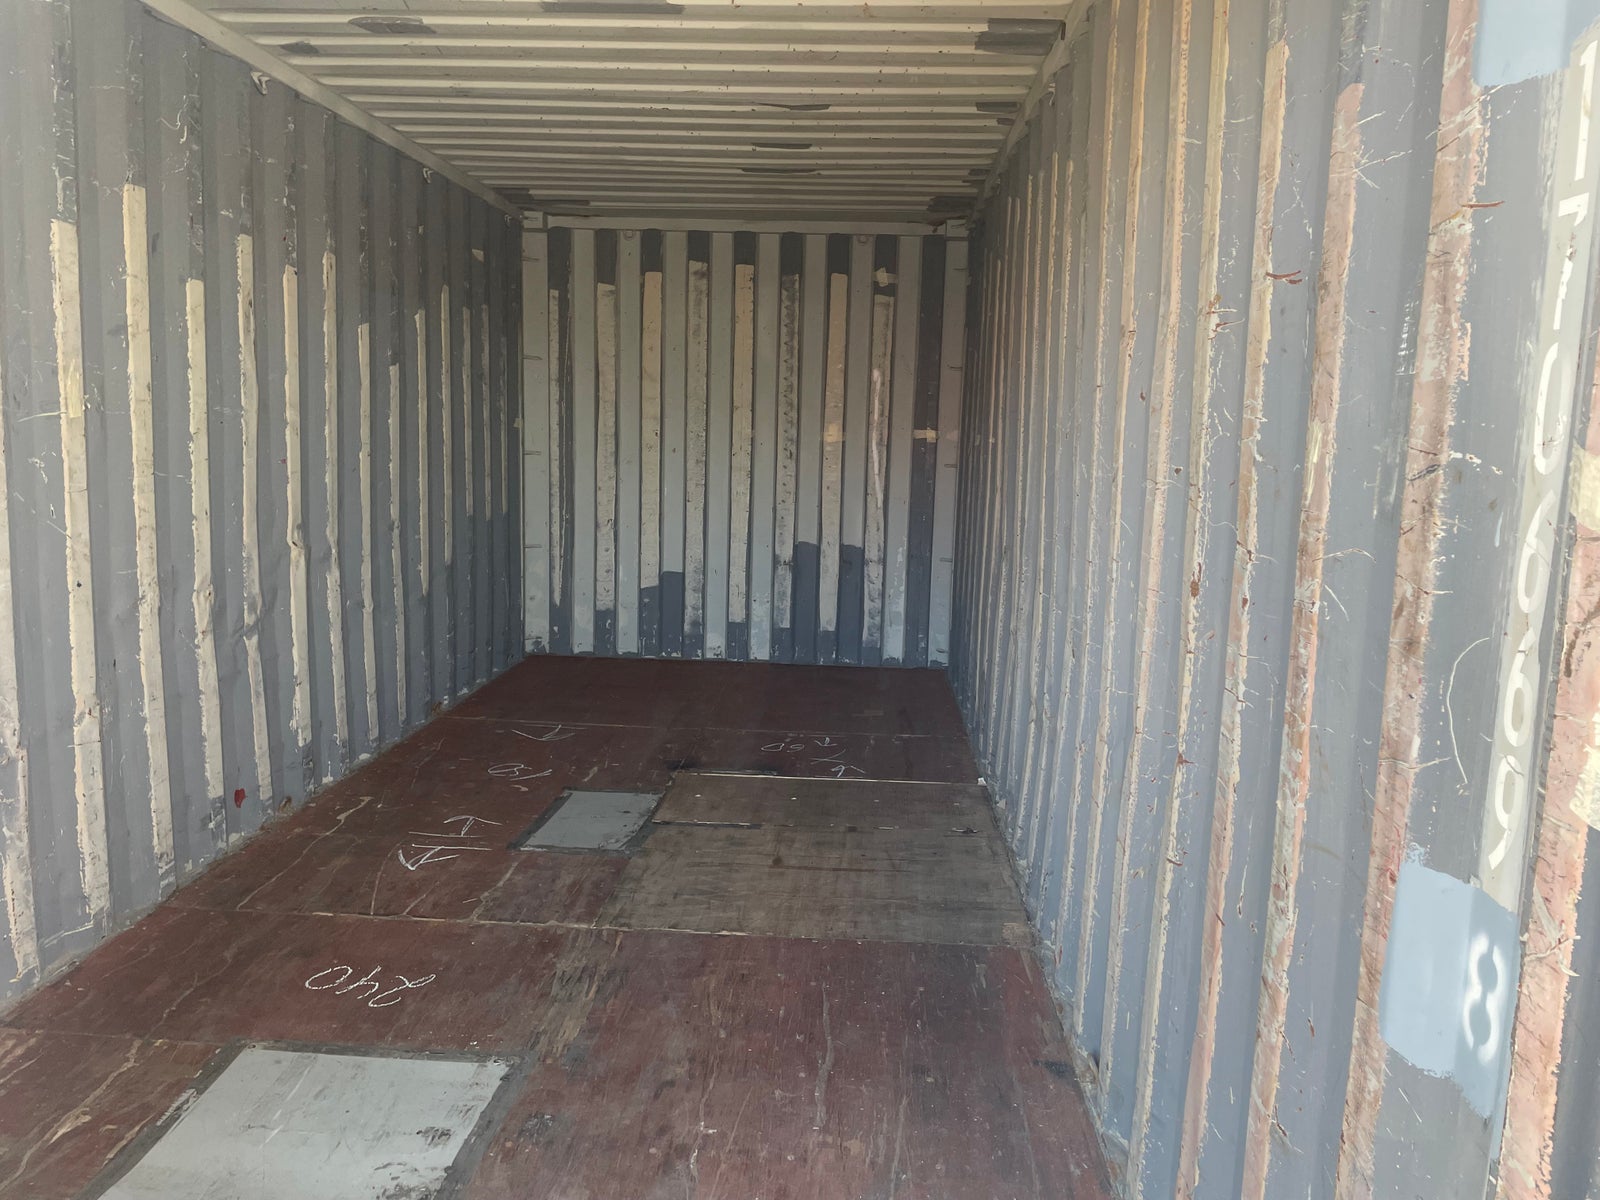 20 fods Container- ID: ASIU 170669-8